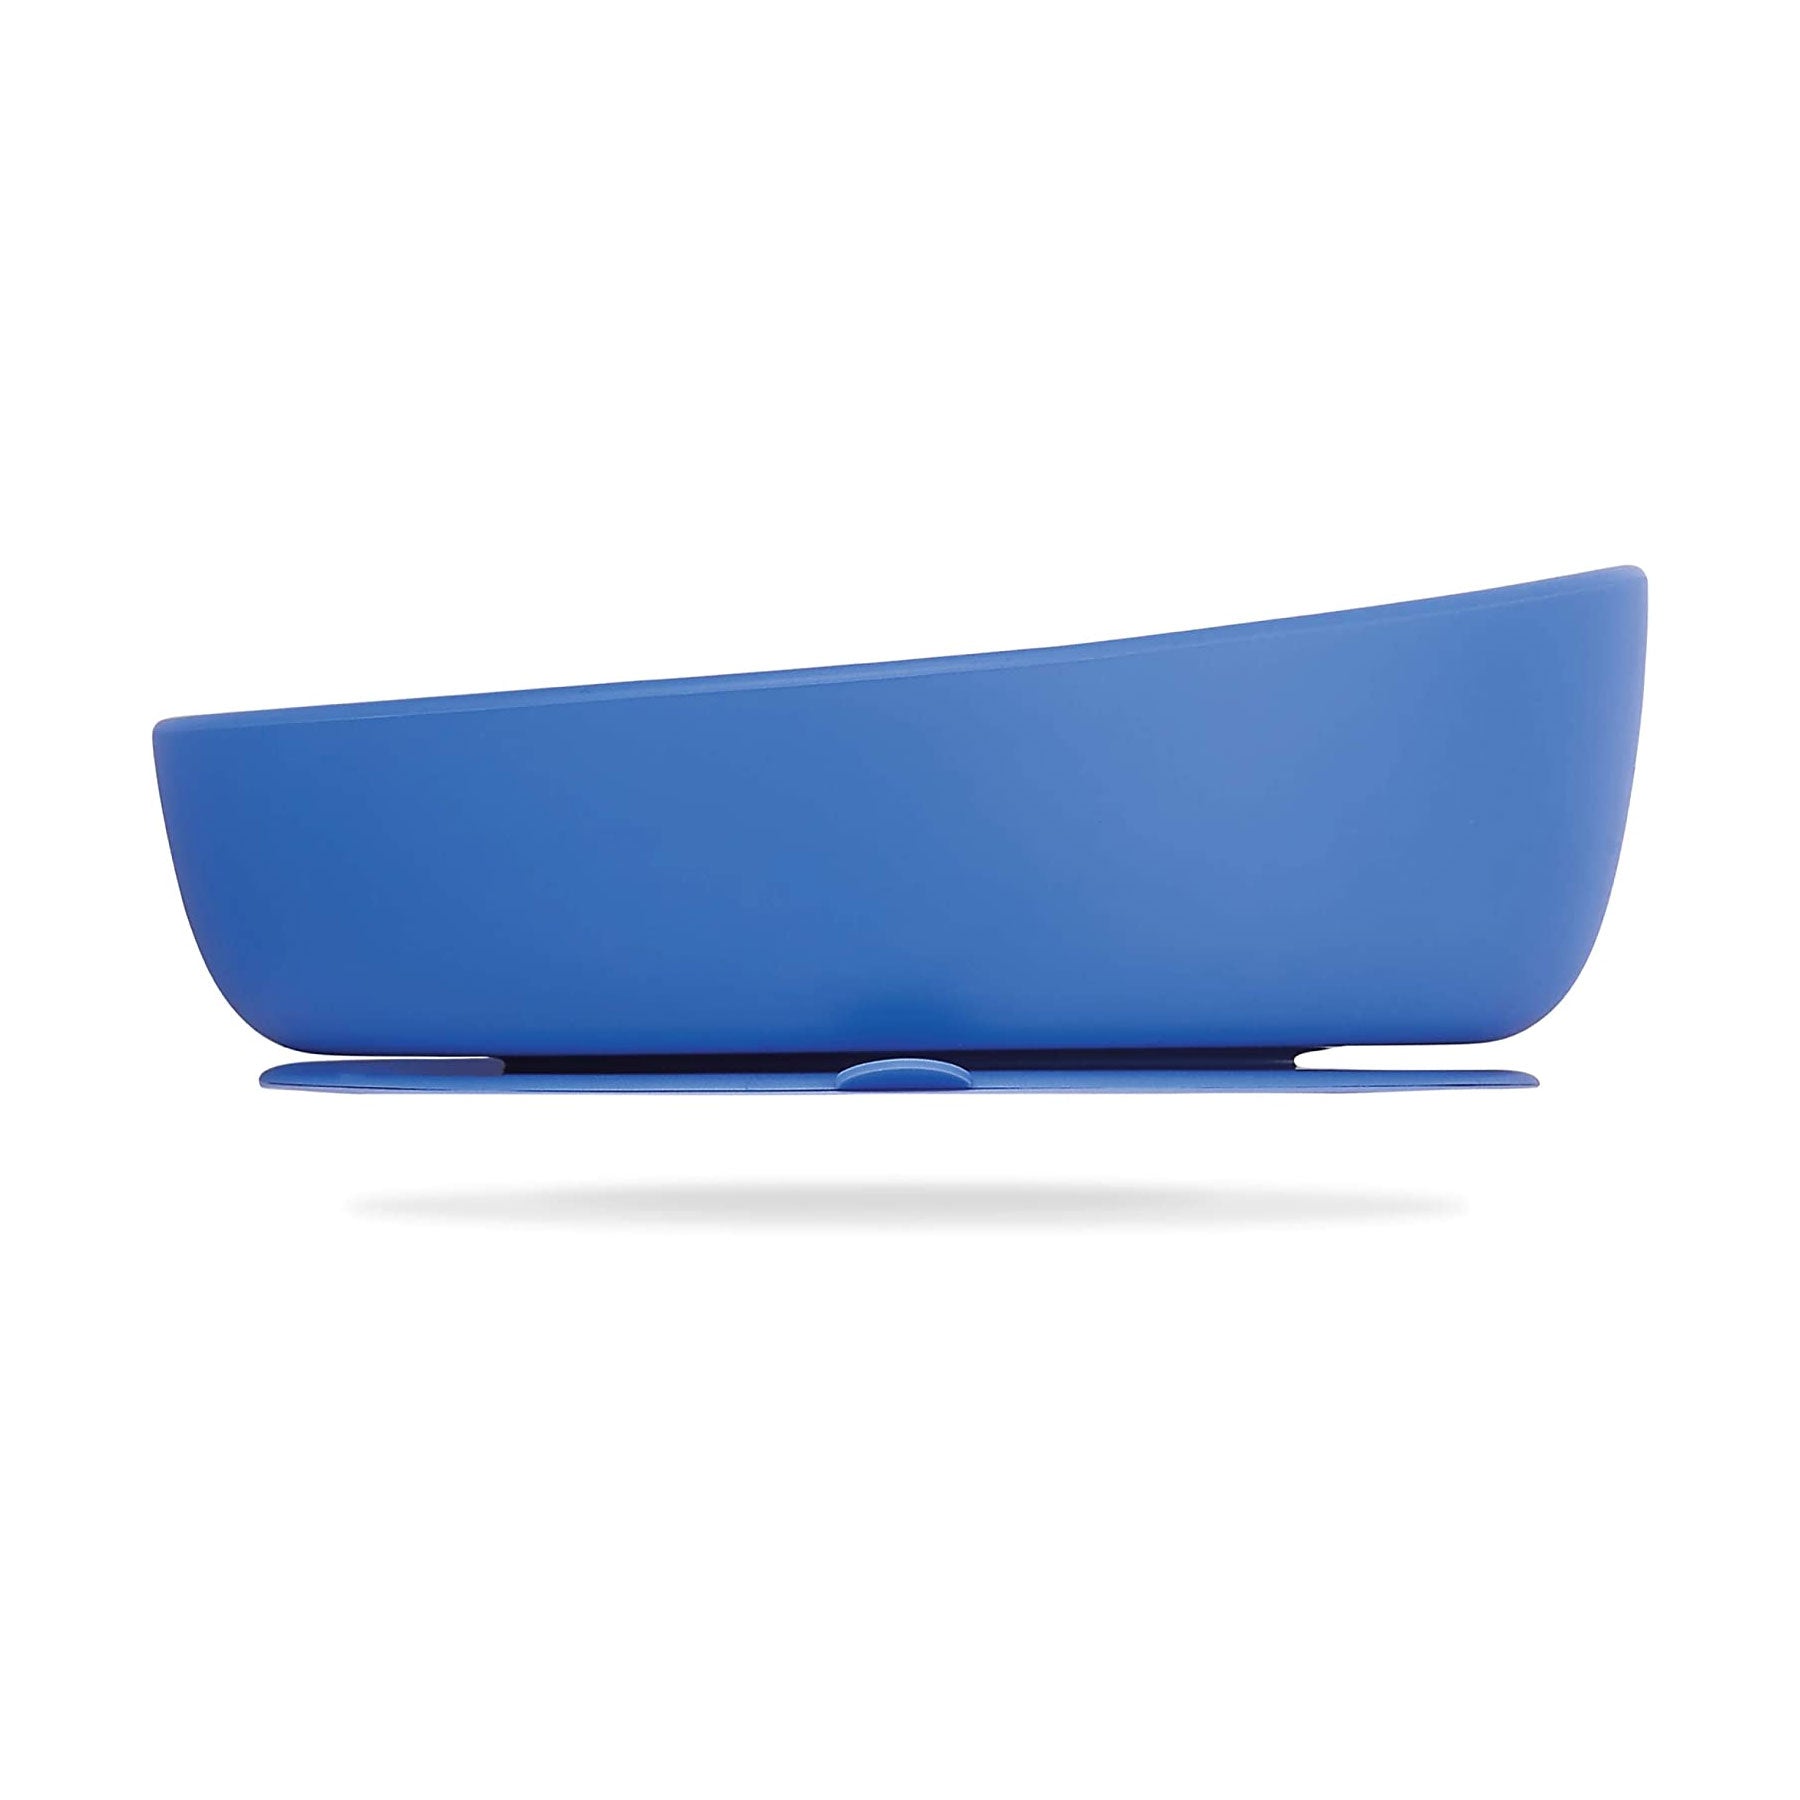 Doidy Bowl is designed to help develop motor skills, with a slanted high lip on one side to allow infants to scoop the food up and load more easily onto a spoon.